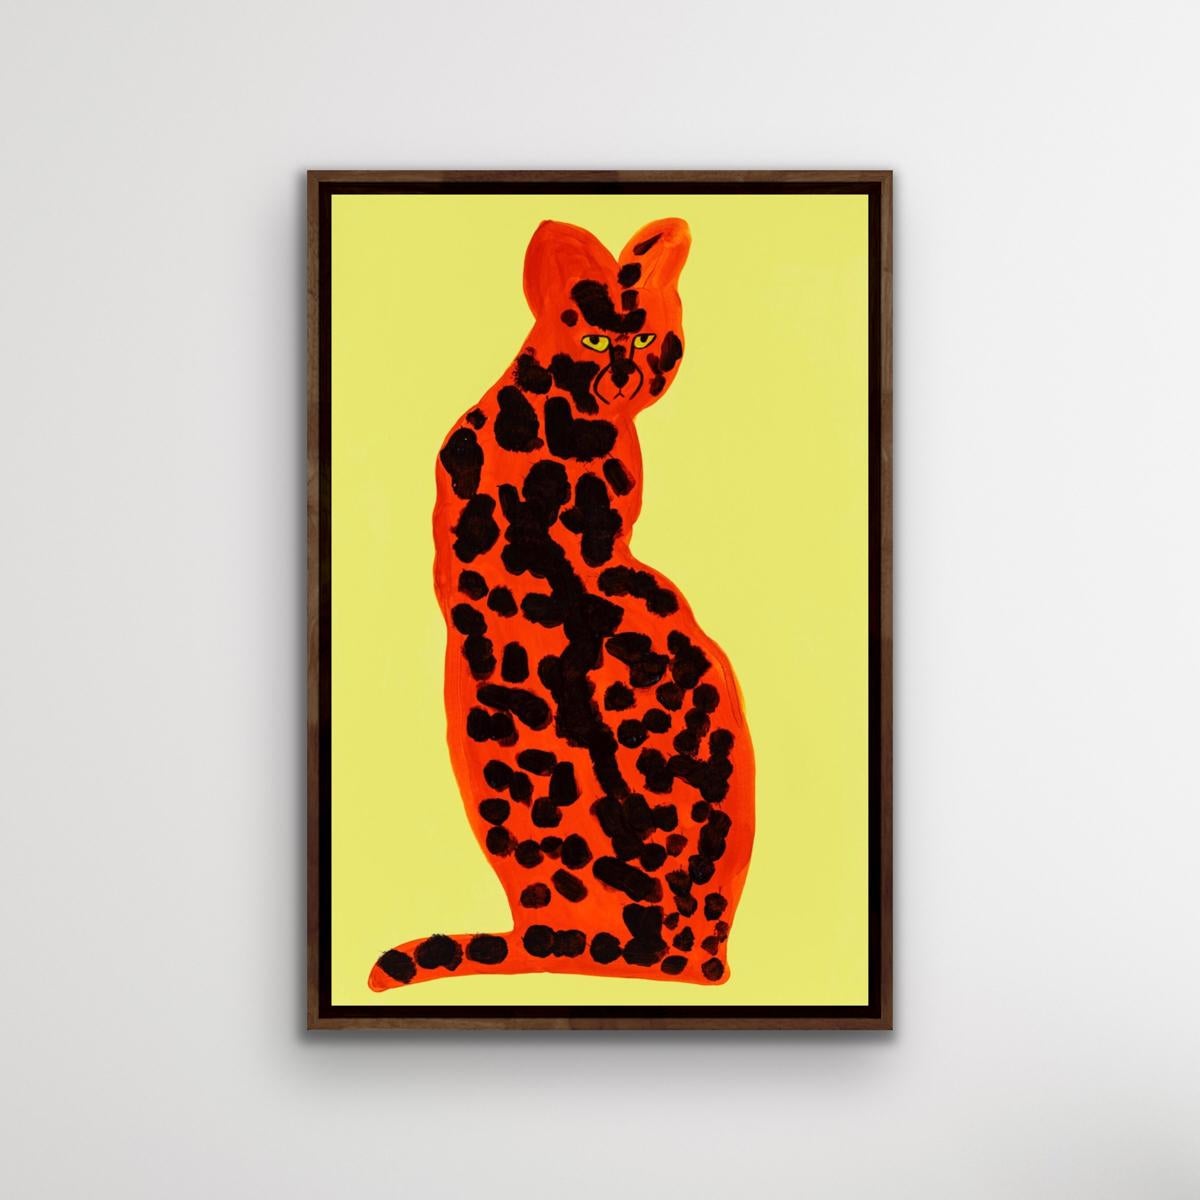 Yellow Serval by Lucie Sheridan [2022]
original and hand signed by the artist 
Acrylic on canvas
Image size: H:76.2 cm x W:50.8 cm
Complete Size of Unframed Work: H:50.8 x 76.2 cm x W:76.2 cm x D:50.8cm
Frame Size: H:79.2 cm x W:53.8 cm x